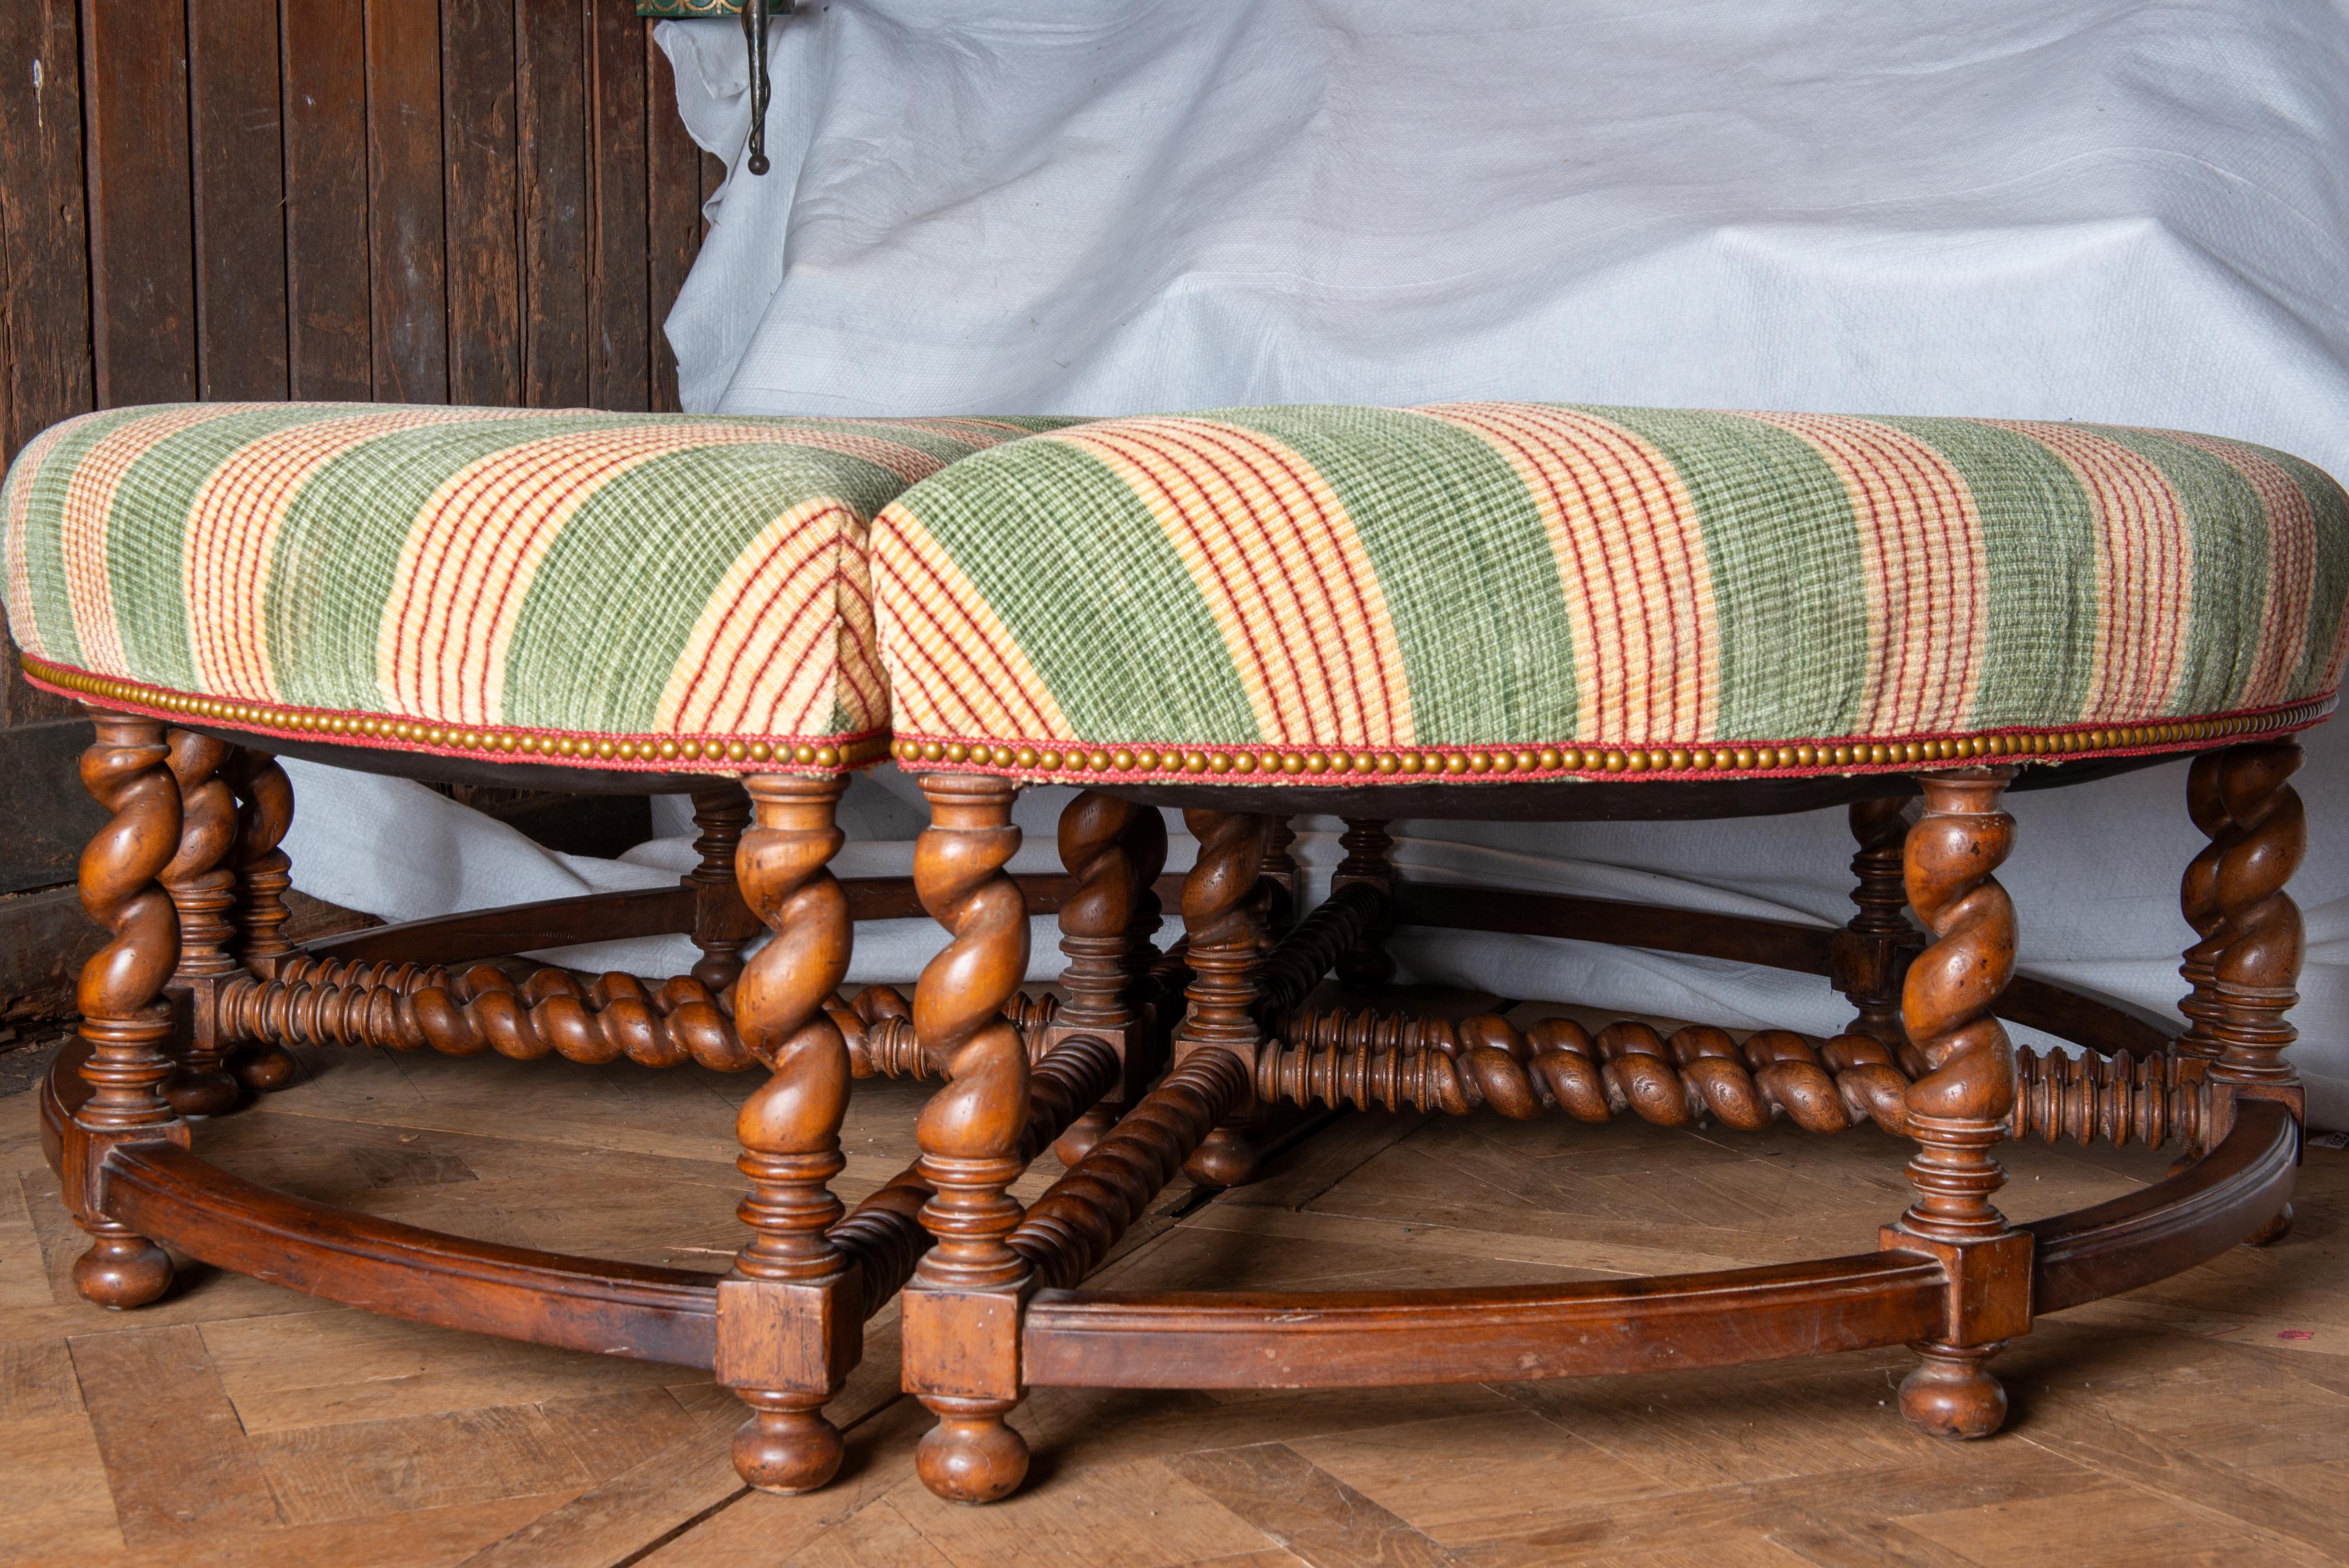 Large Four Piece Round Upholstered Ottoman with Barley Twist Wood Legs In Good Condition For Sale In Stamford, CT